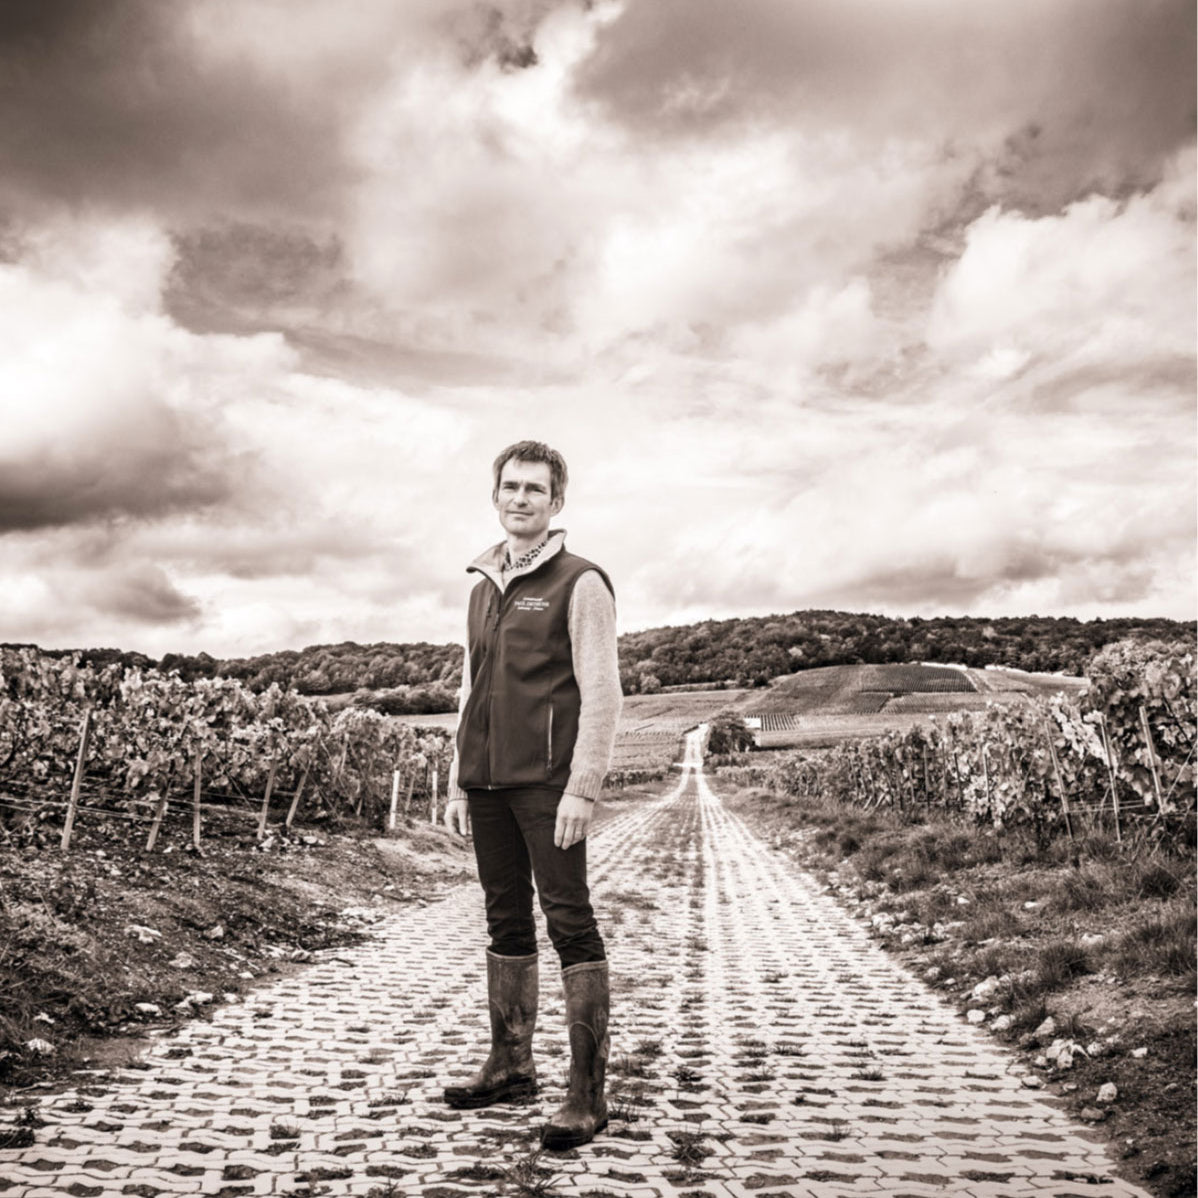 20 Questions with... Pierre Dethune, Champagne Paul Dethune